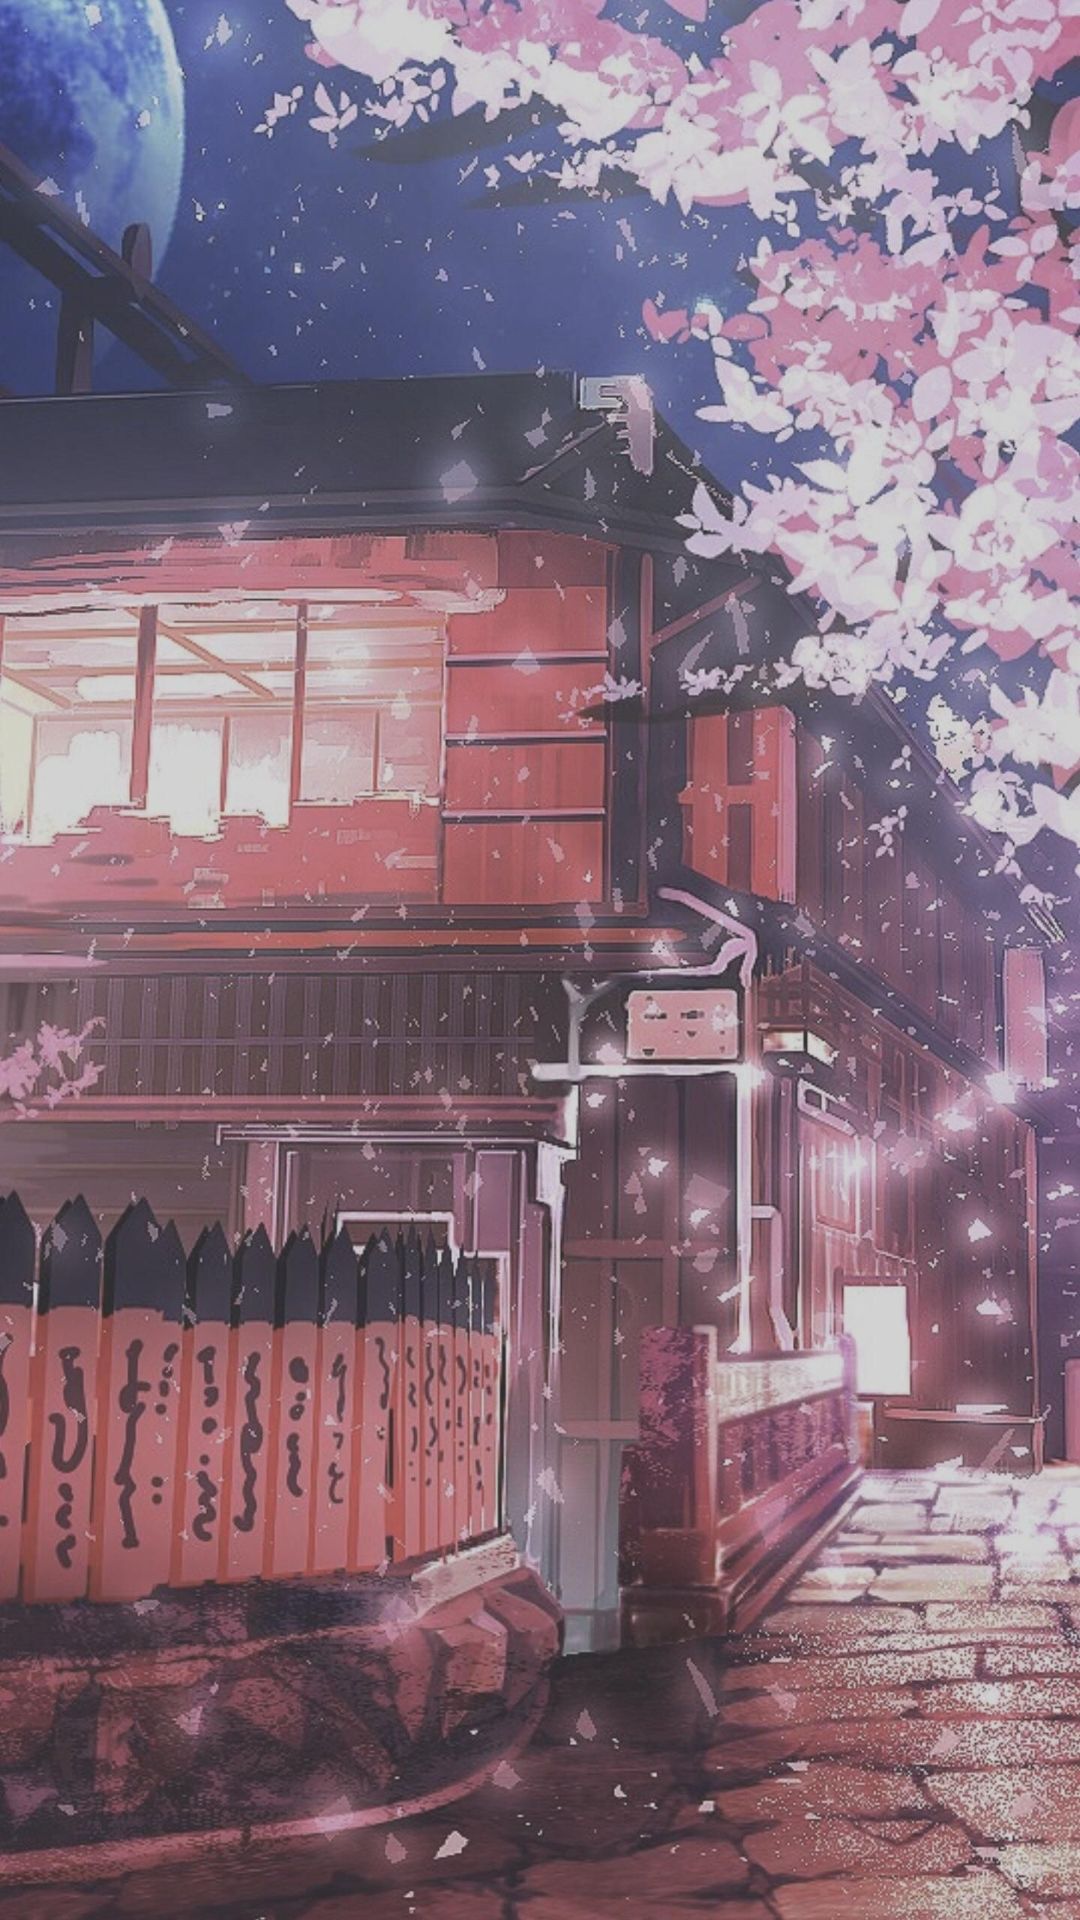 Aesthetic anime houses with cherry blossoms and a full moon - Anime landscape